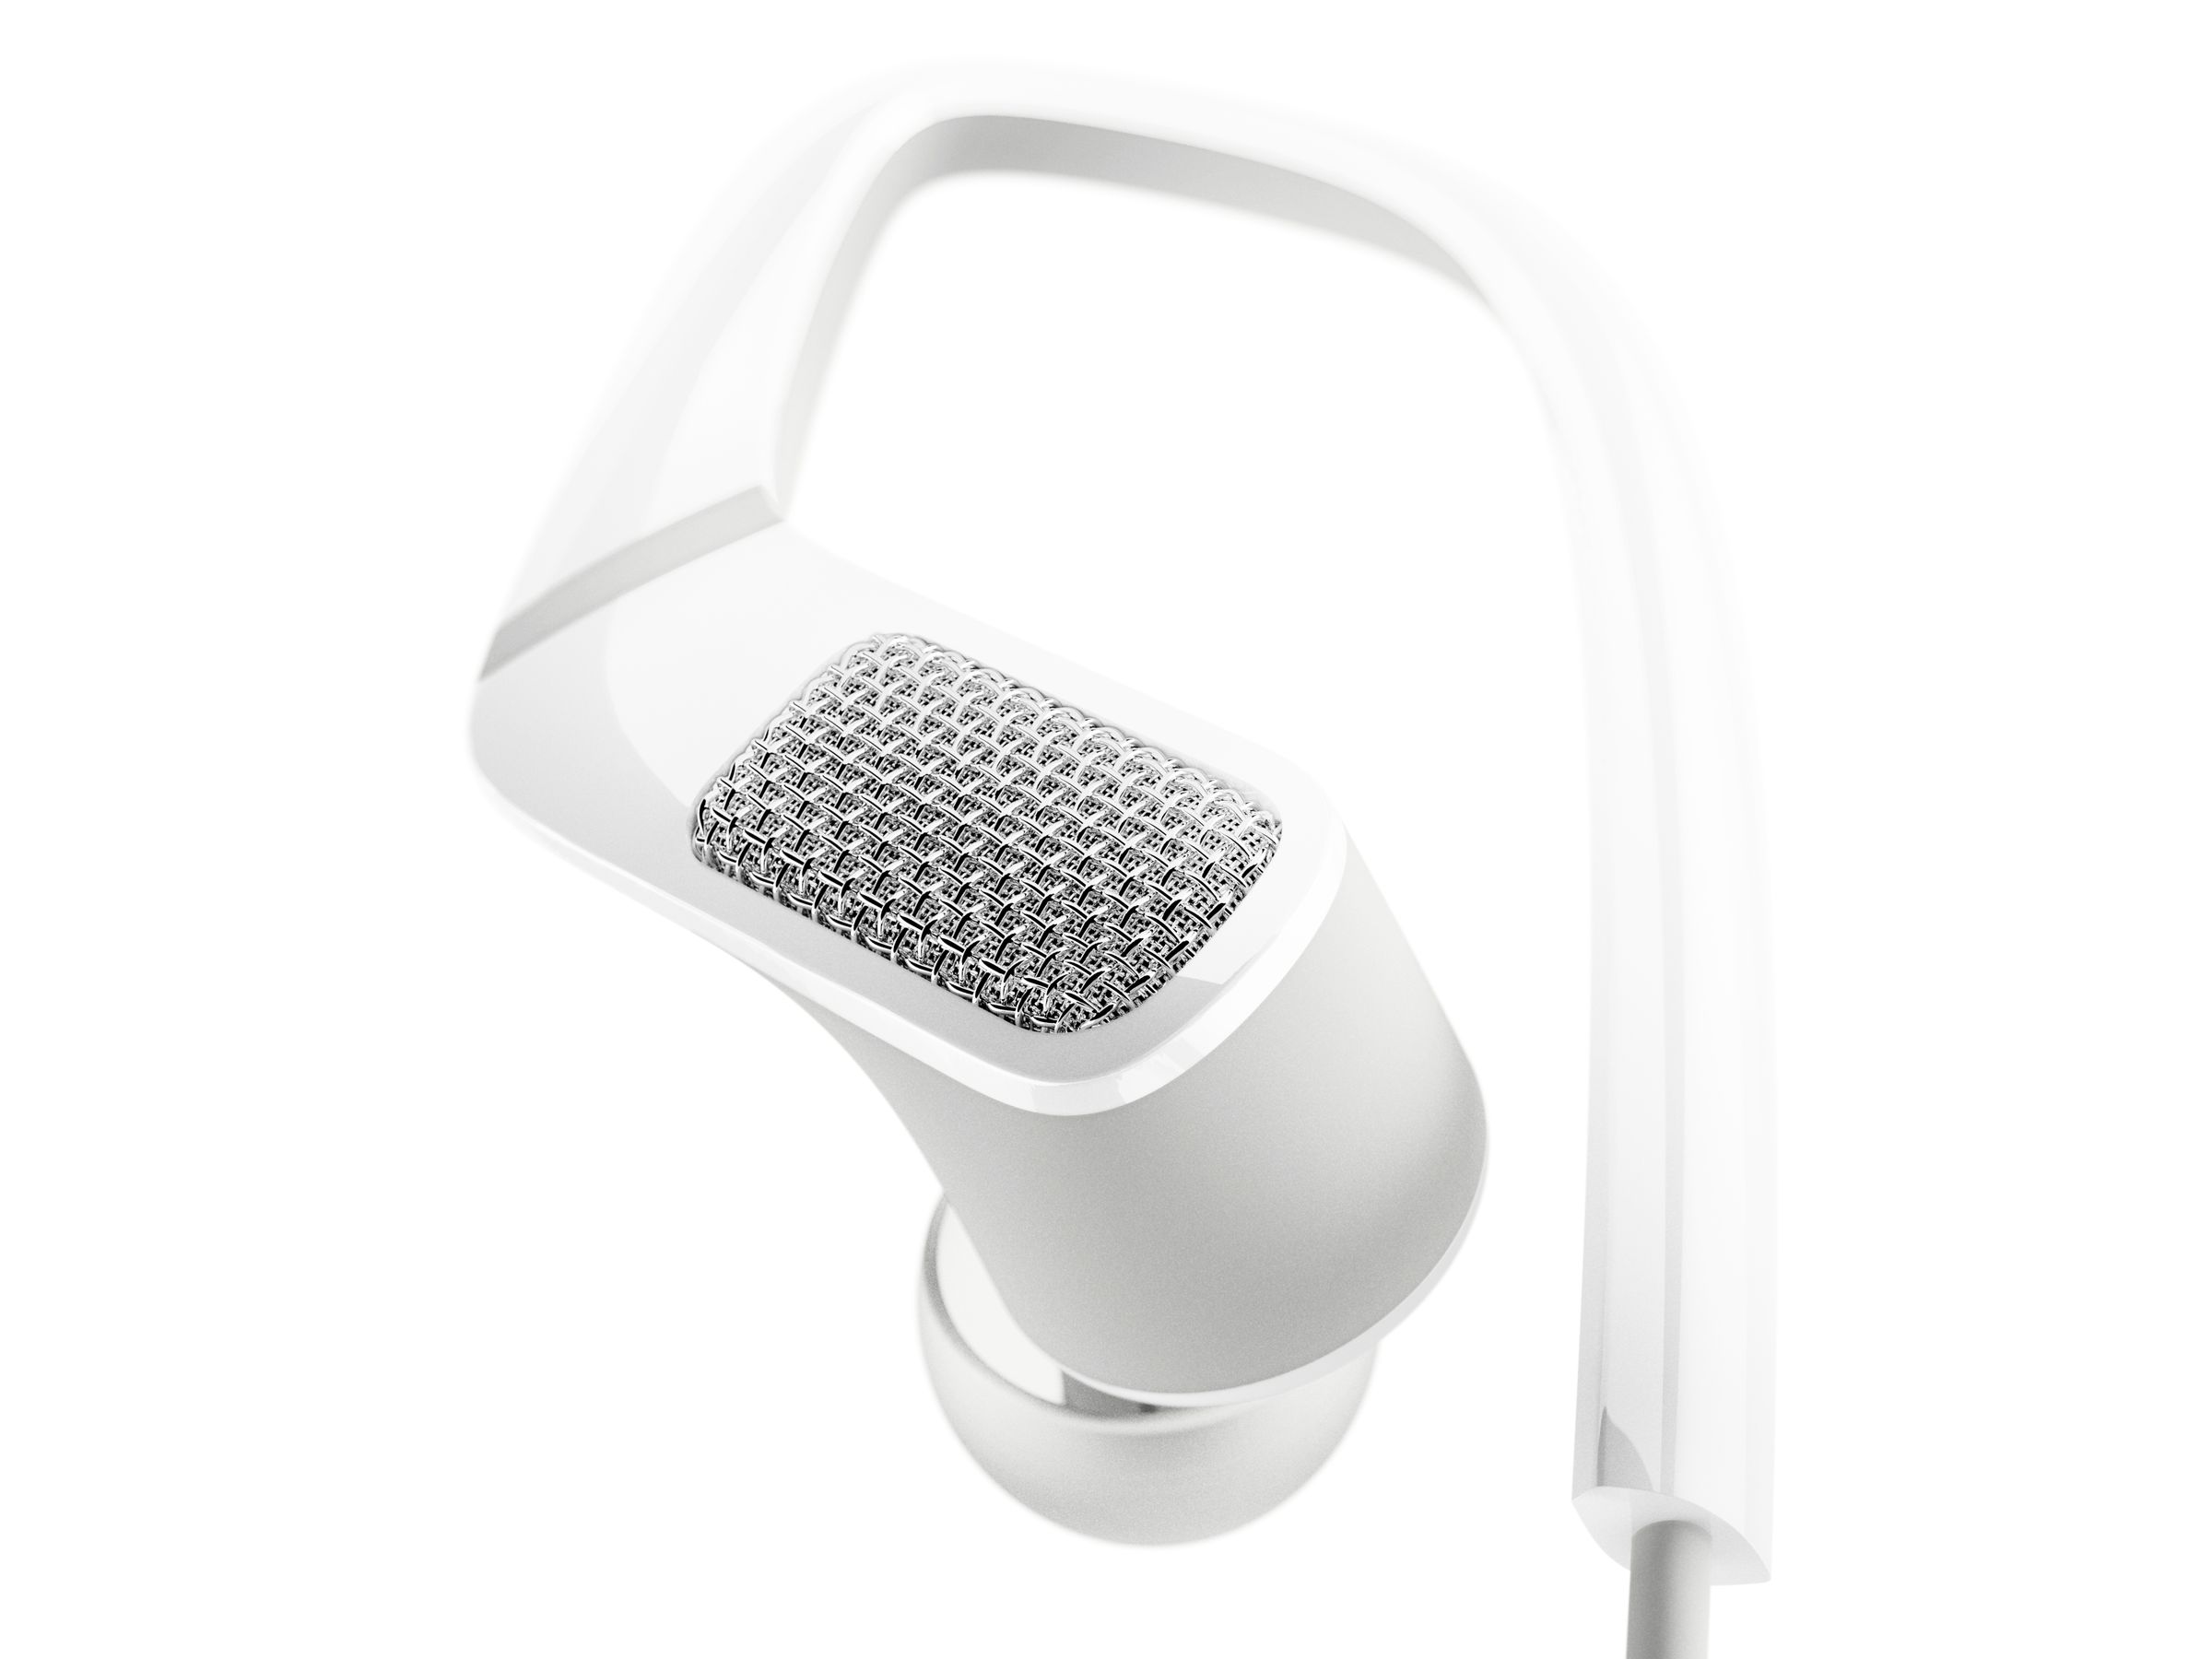 The Ambeo Smart Surrounds have microphones embedded under a mesh in each earbud.